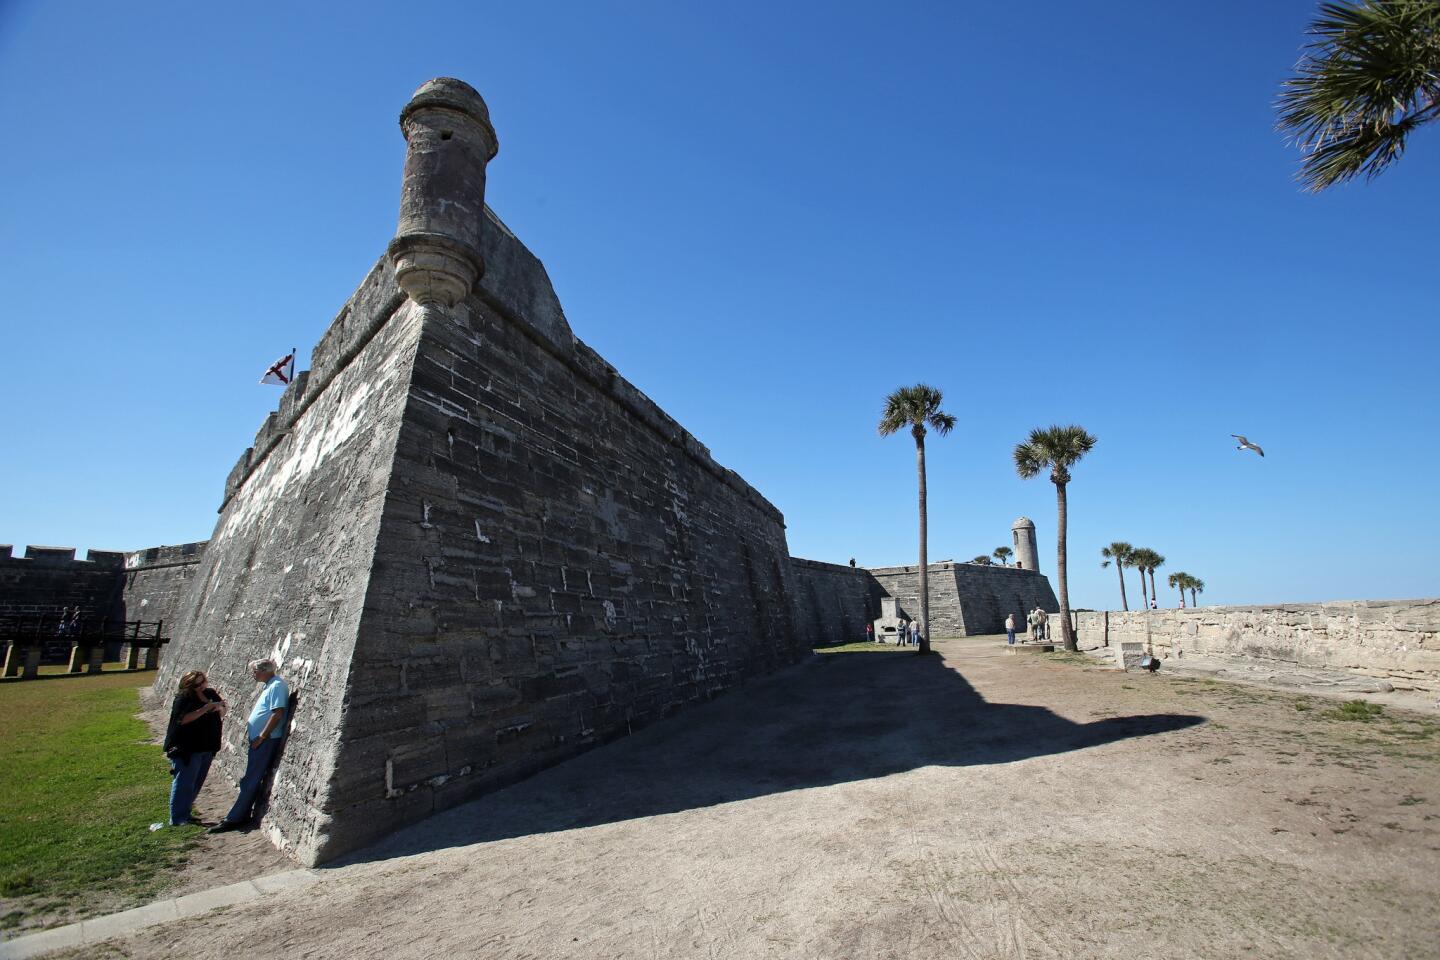 Located in America's oldest city you'll find Castillo de San Marcos, the scene of several supposed hauntings. Back in 1784 during the second Spanish occupation Col. Garcia Marti suspected his wife Delores Marti of having an affair with Capt. Abela when he smelled her distinct perfume on his uniform. It's said the jealous husband killed the lovers and their spirits still haunt the halls. Guests have also reported seeing a Seminole leap from the wall to freedom and night watchmen who refused to abandon their post even after death.